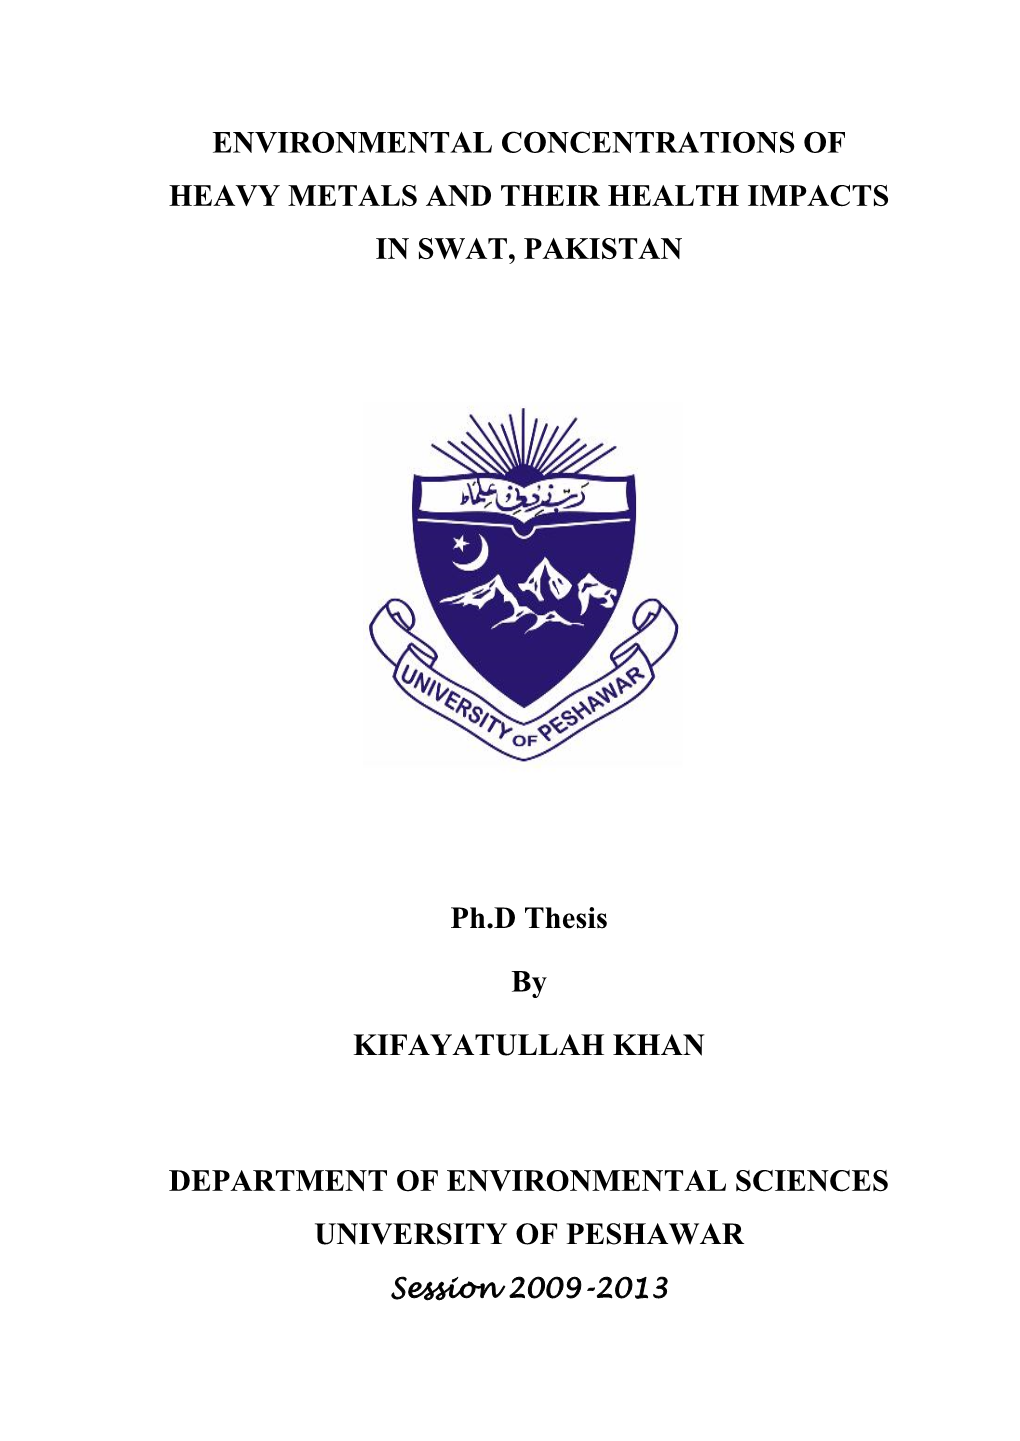 ENVIRONMENTAL CONCENTRATIONS of HEAVY METALS and THEIR HEALTH IMPACTS in SWAT, PAKISTAN Ph.D Thesis by KIFAYATULLAH KHAN DEPARTM